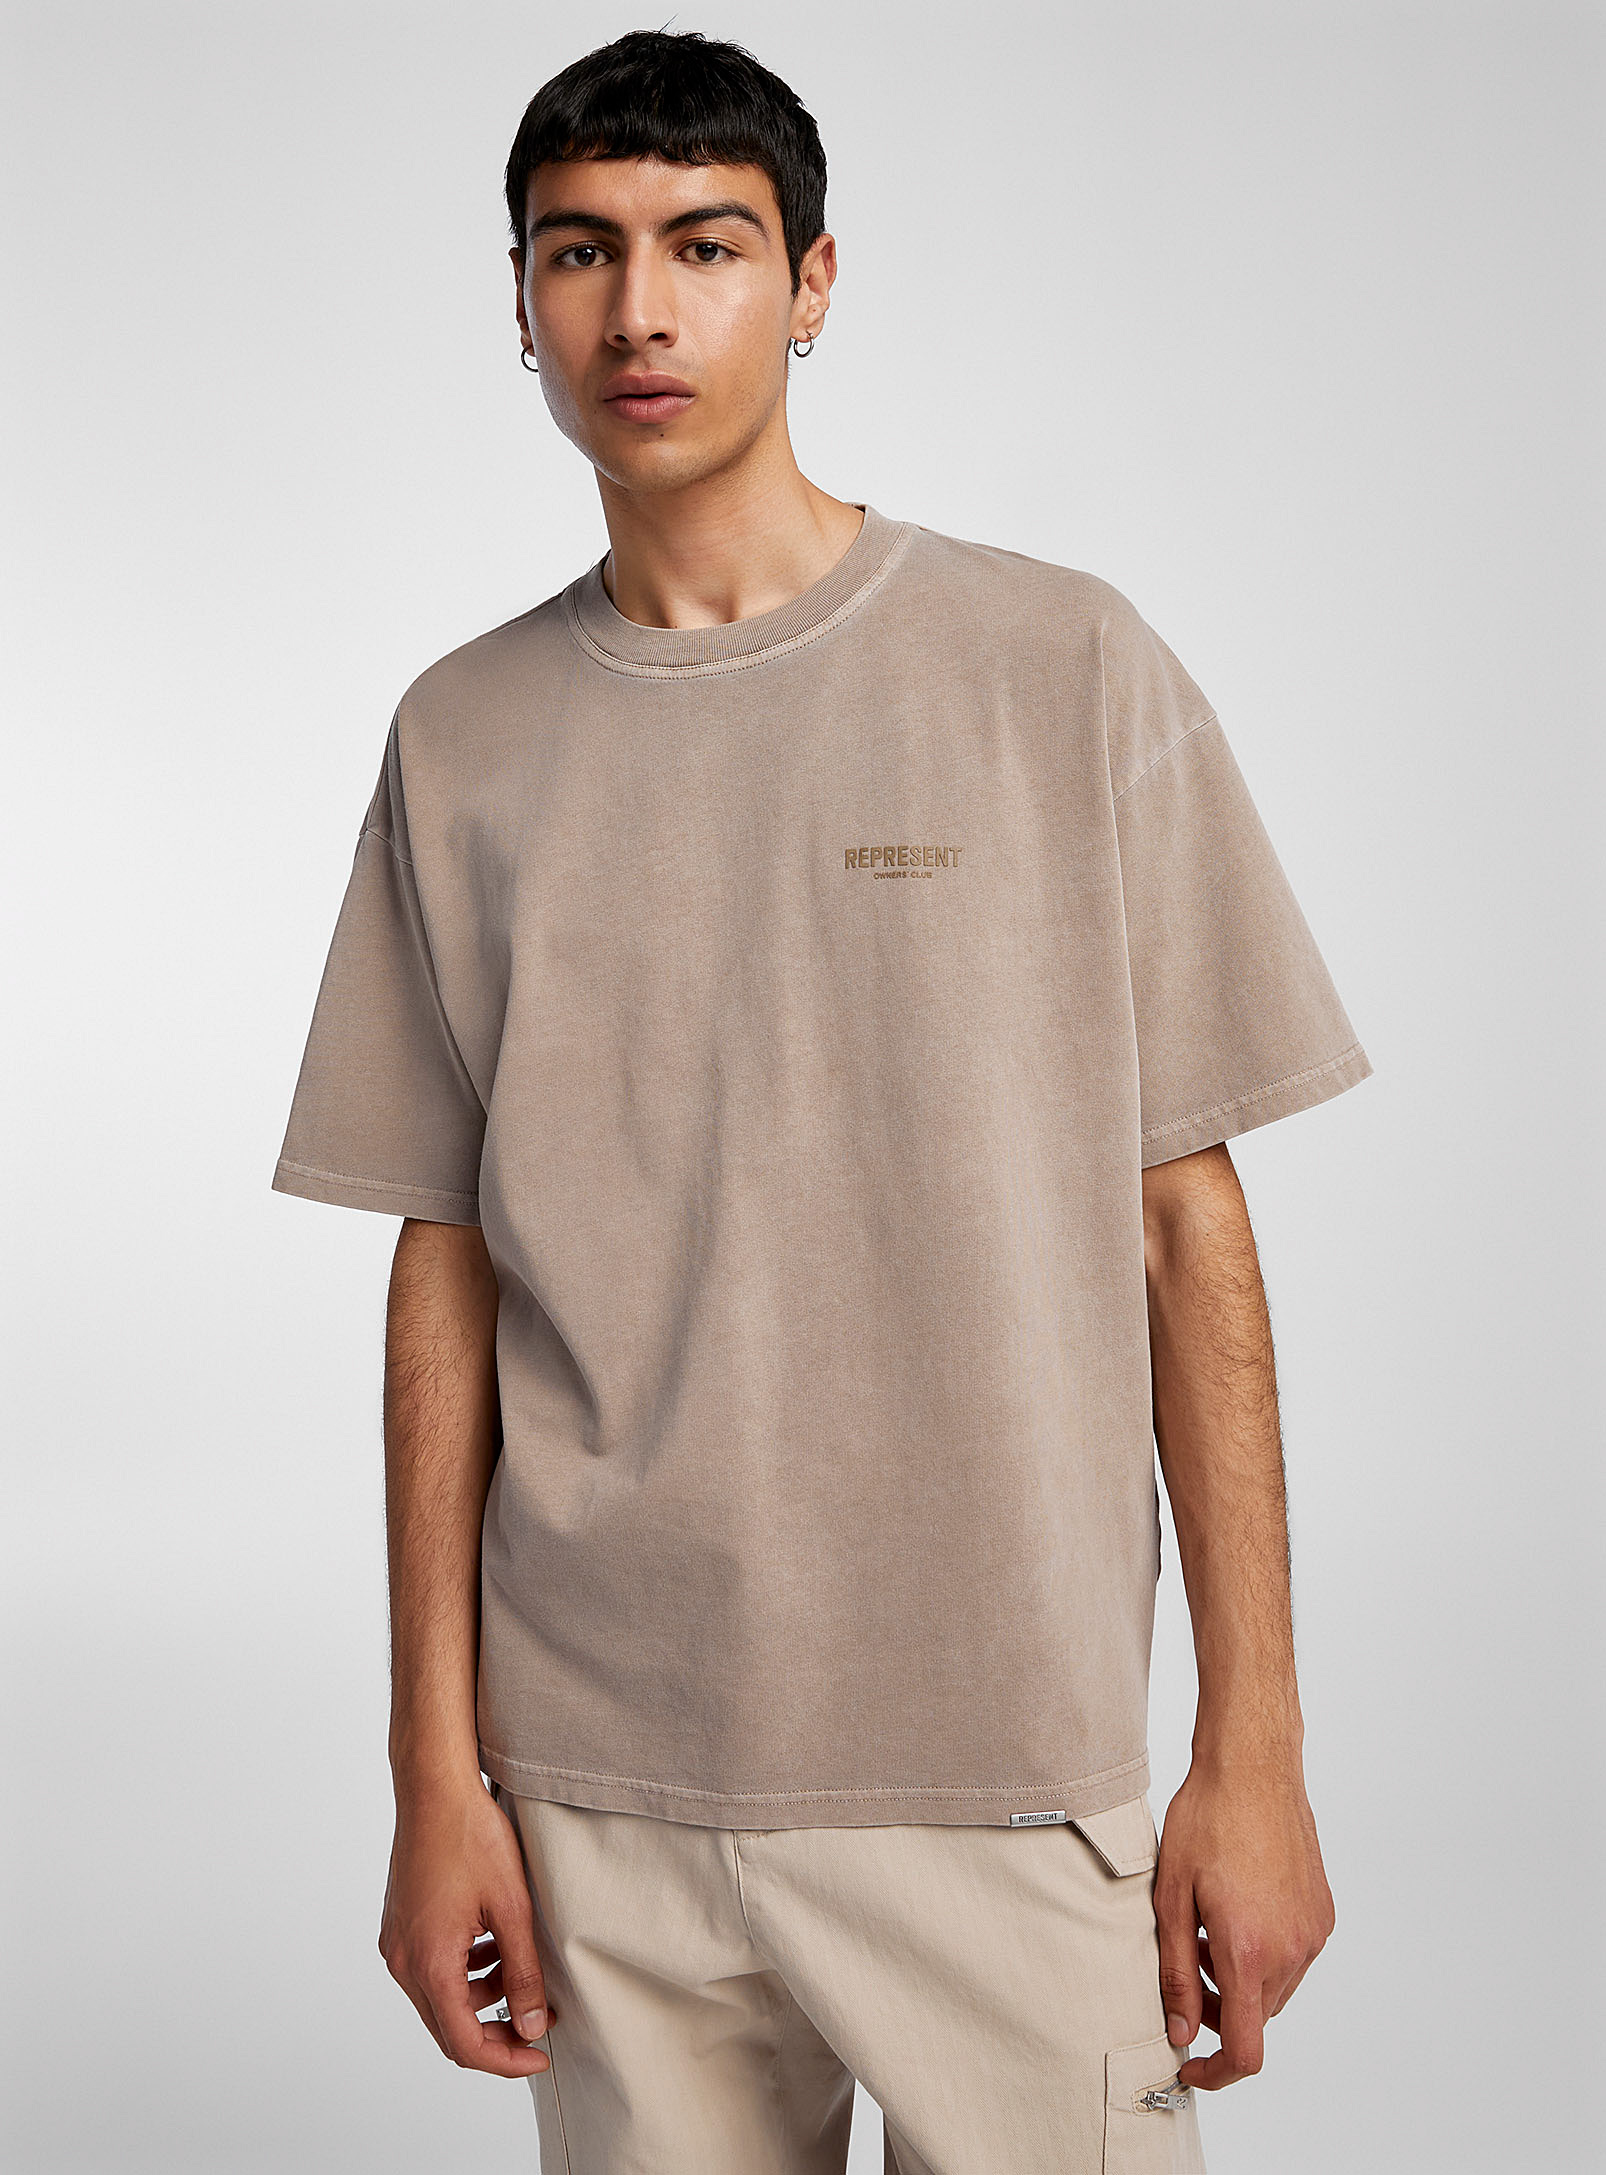 Represent Owners' Club T-shirt In Ivory/cream Beige